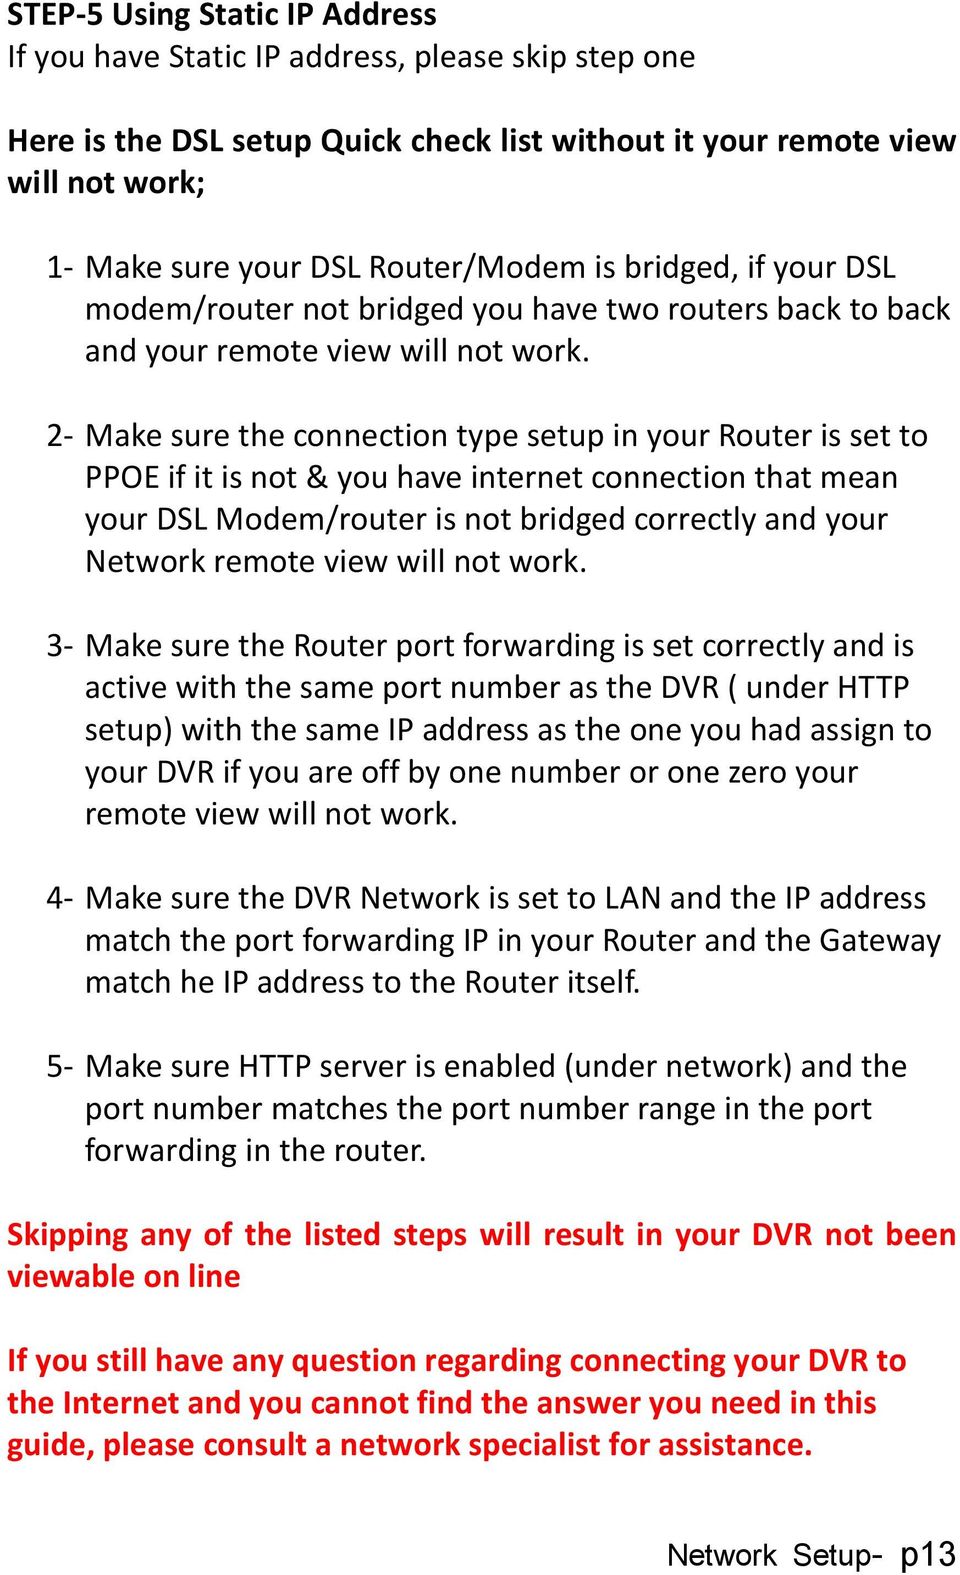 2- Make sure the connection type setup in your Router is set to PPOE if it is not & you have internet connection that mean your DSL Modem/router is not bridged correctly and your Network remote view